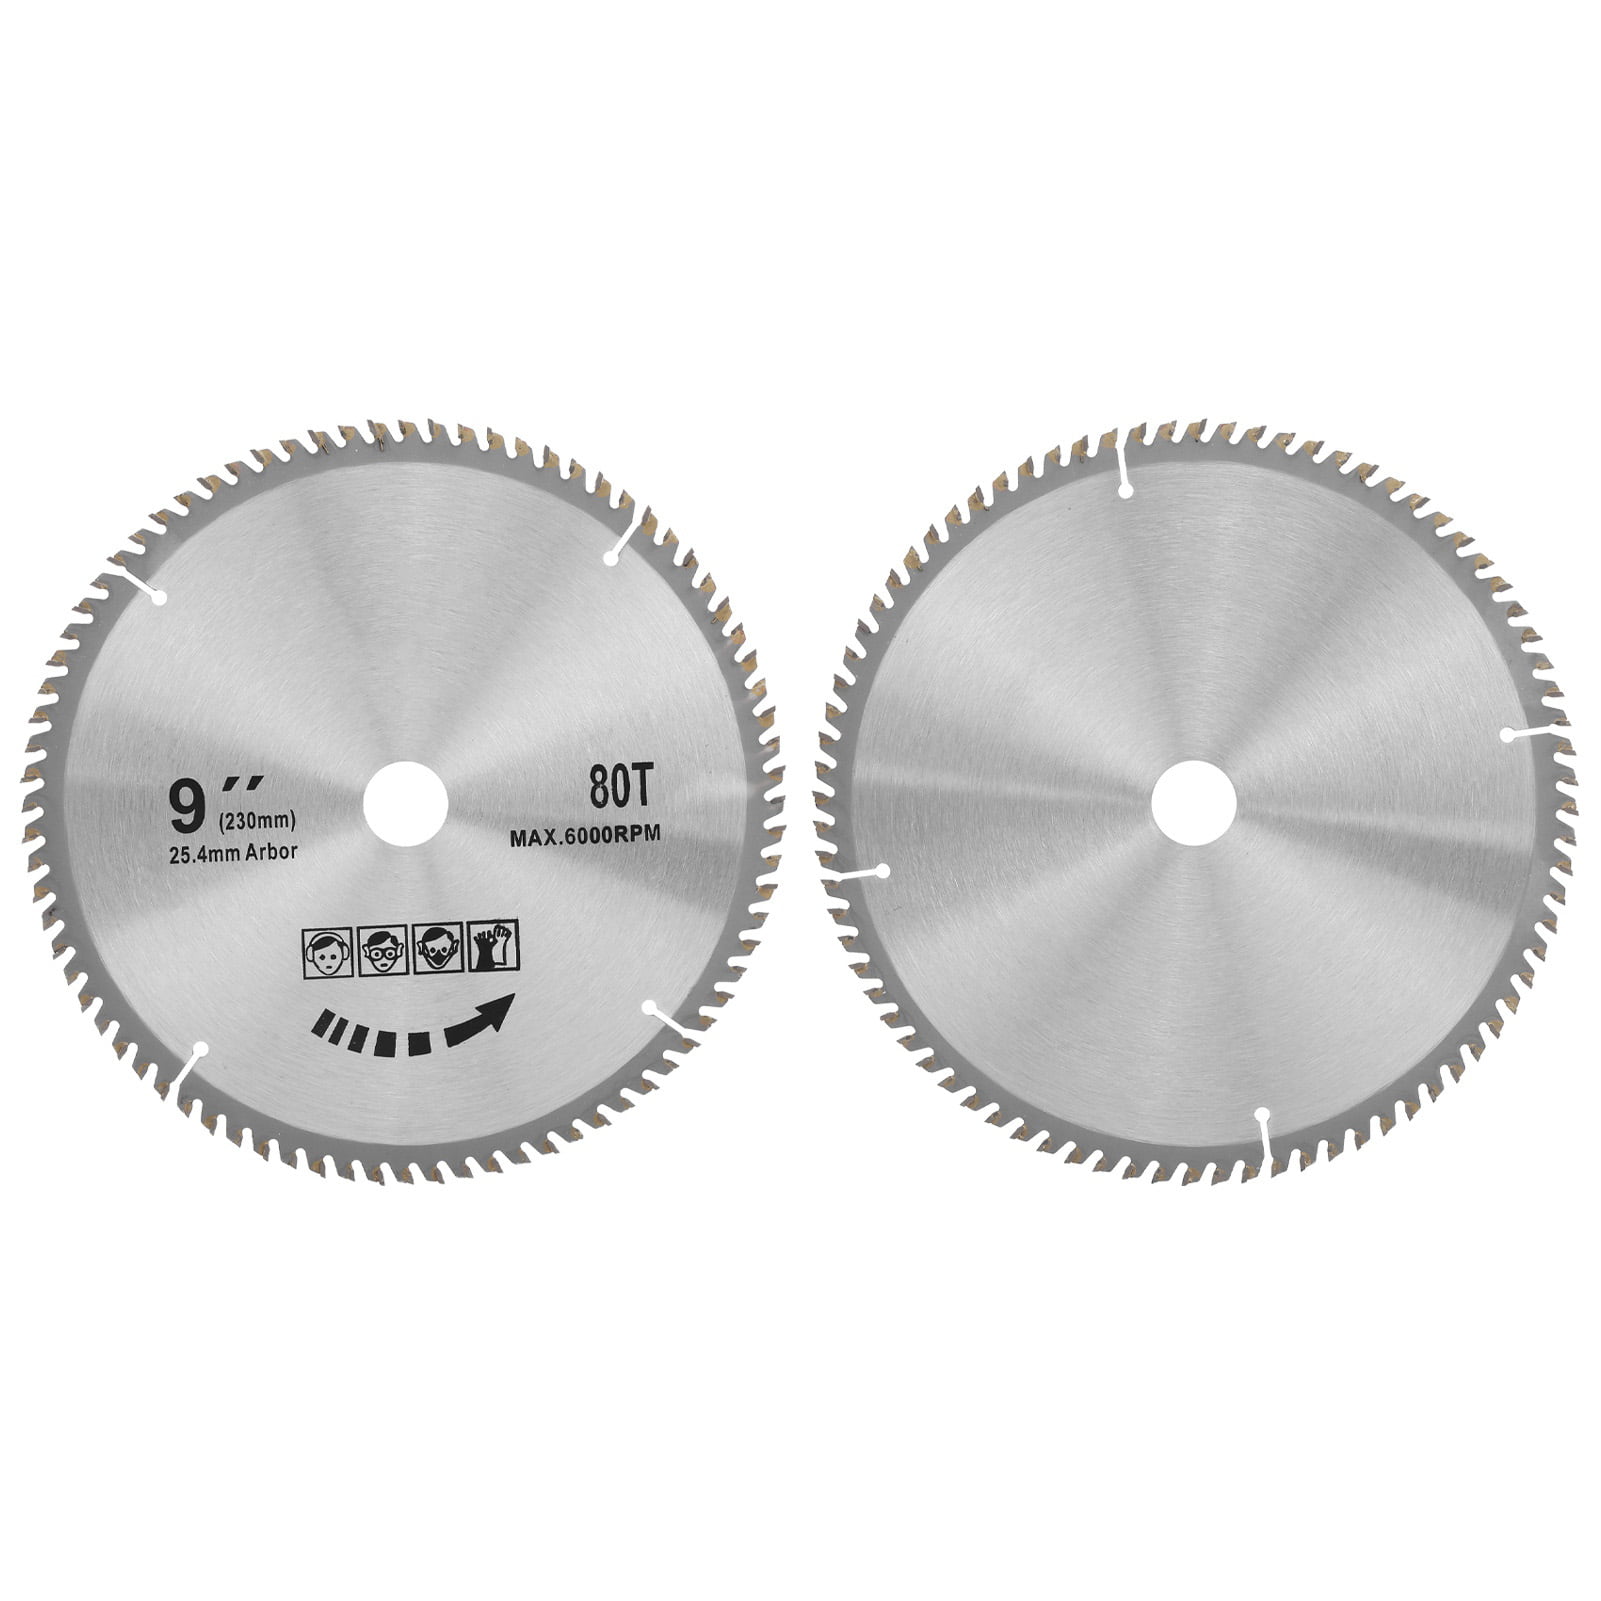 3 x 230mm 9" ULTRA THIN METAL CUTTING BLADE DISC STEEL & STAINLESS DISCS 1.8MM 